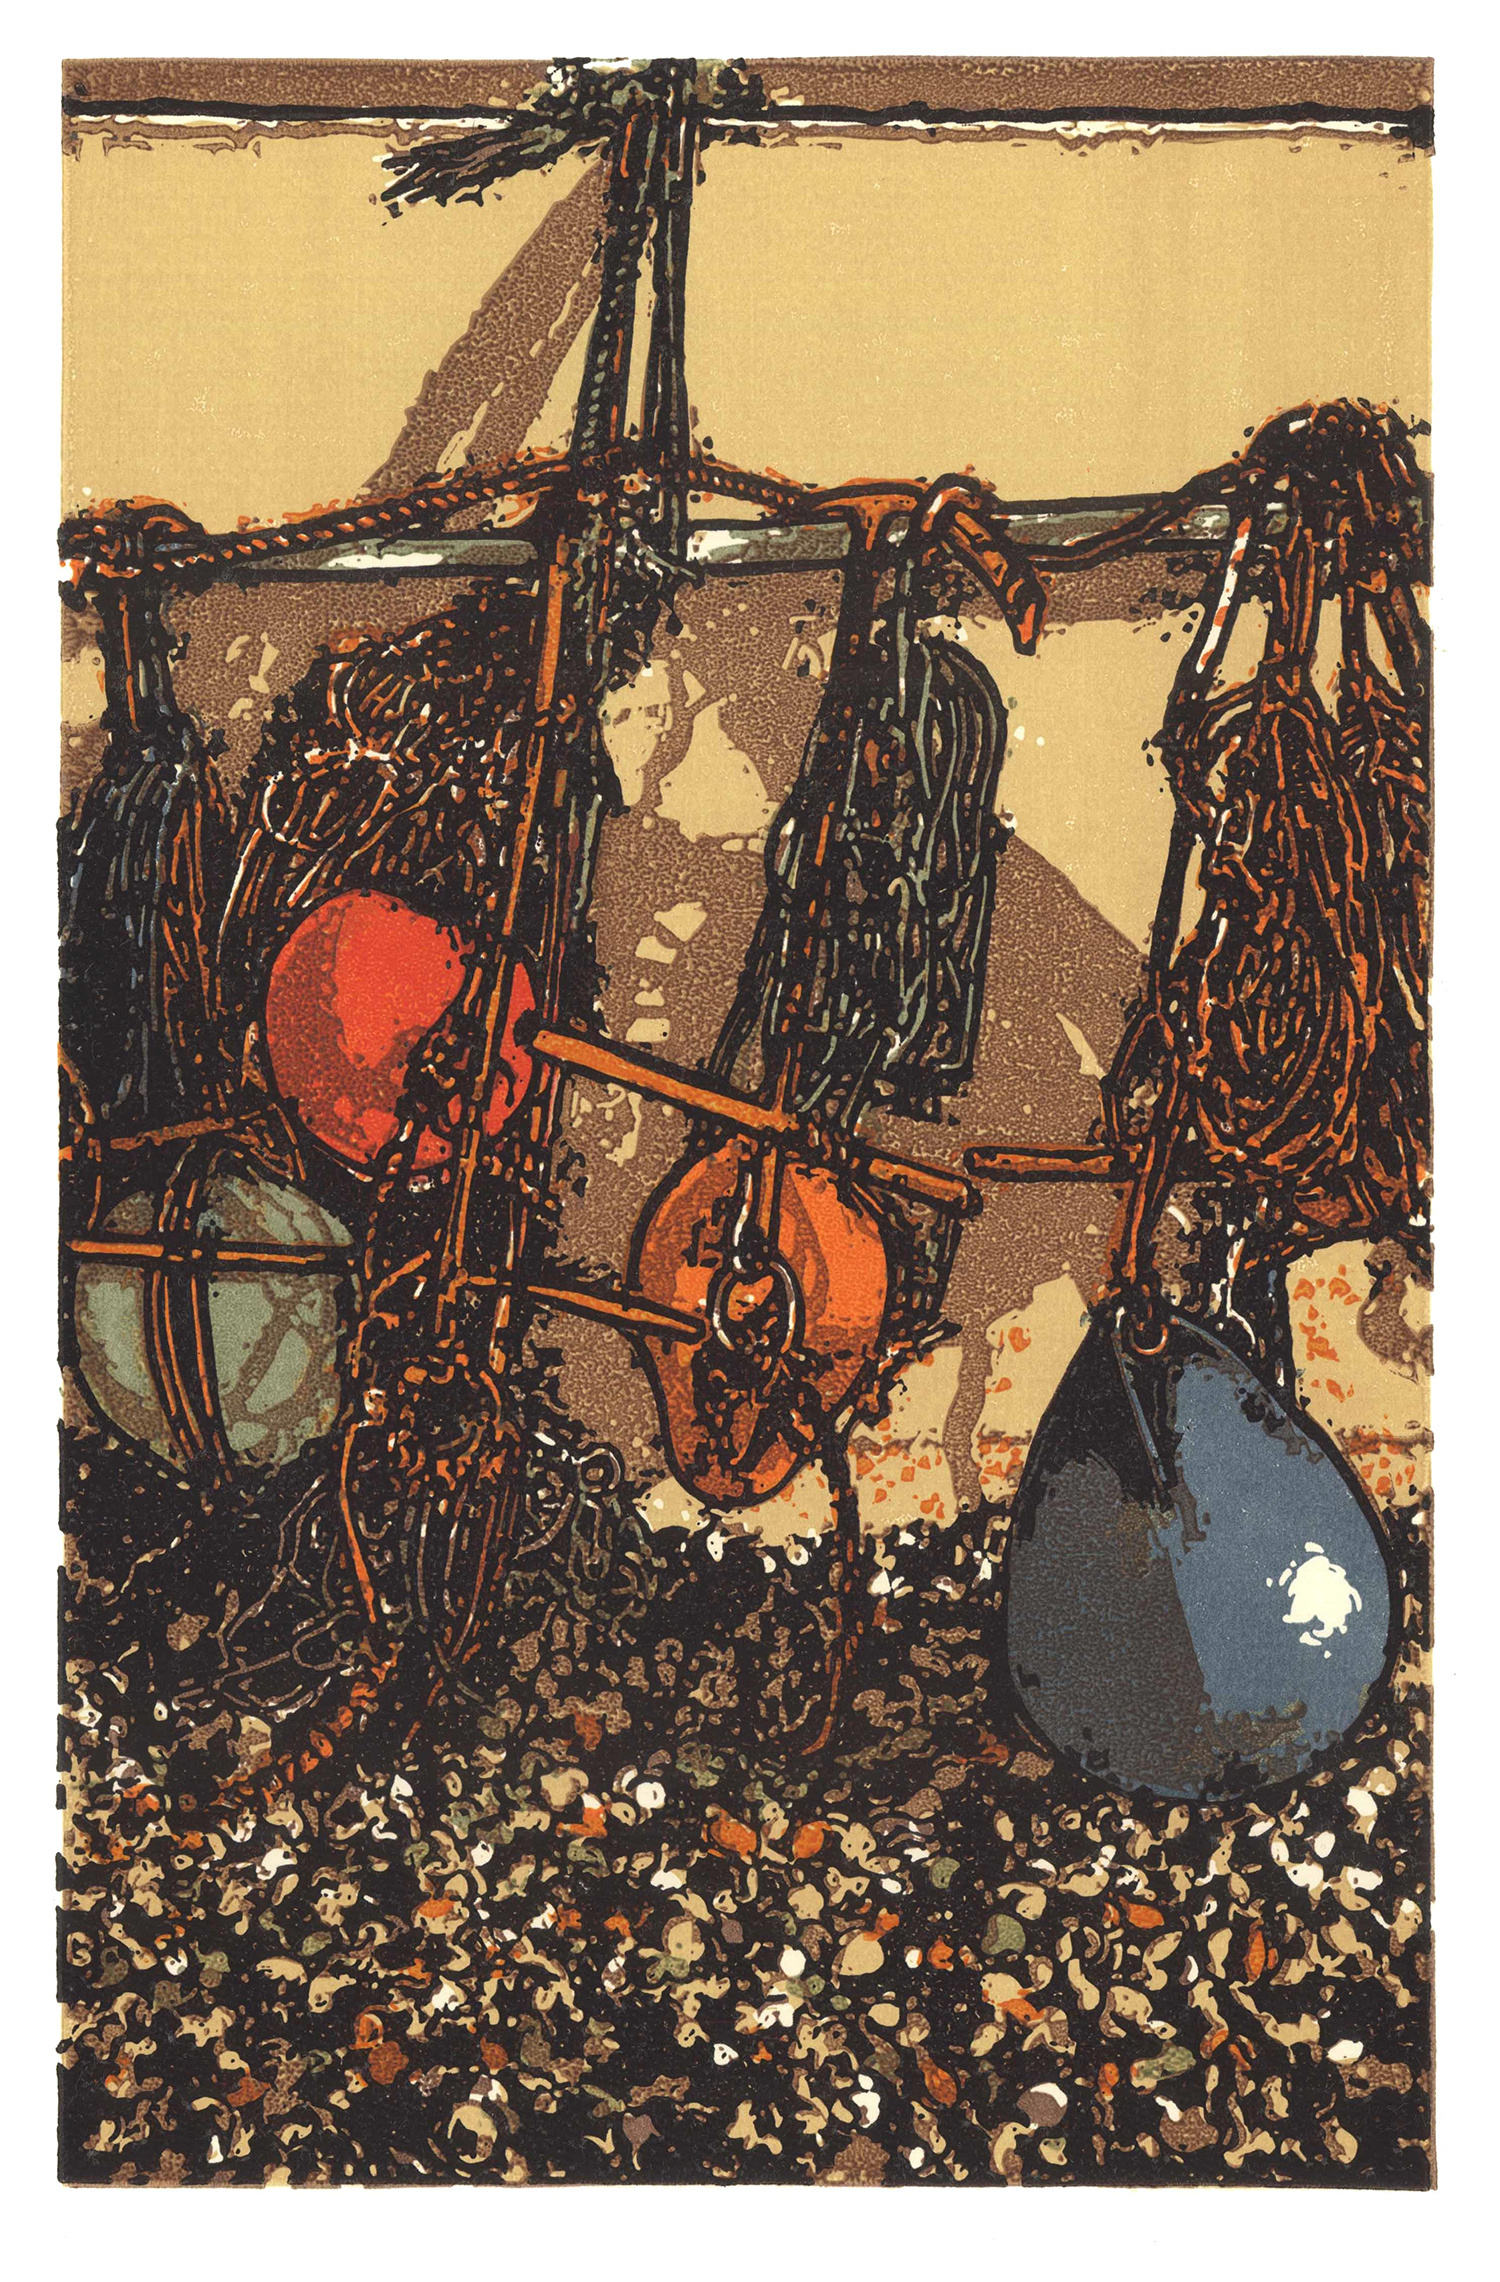 Floats, Ropes and Anchors by H.J. Jackson